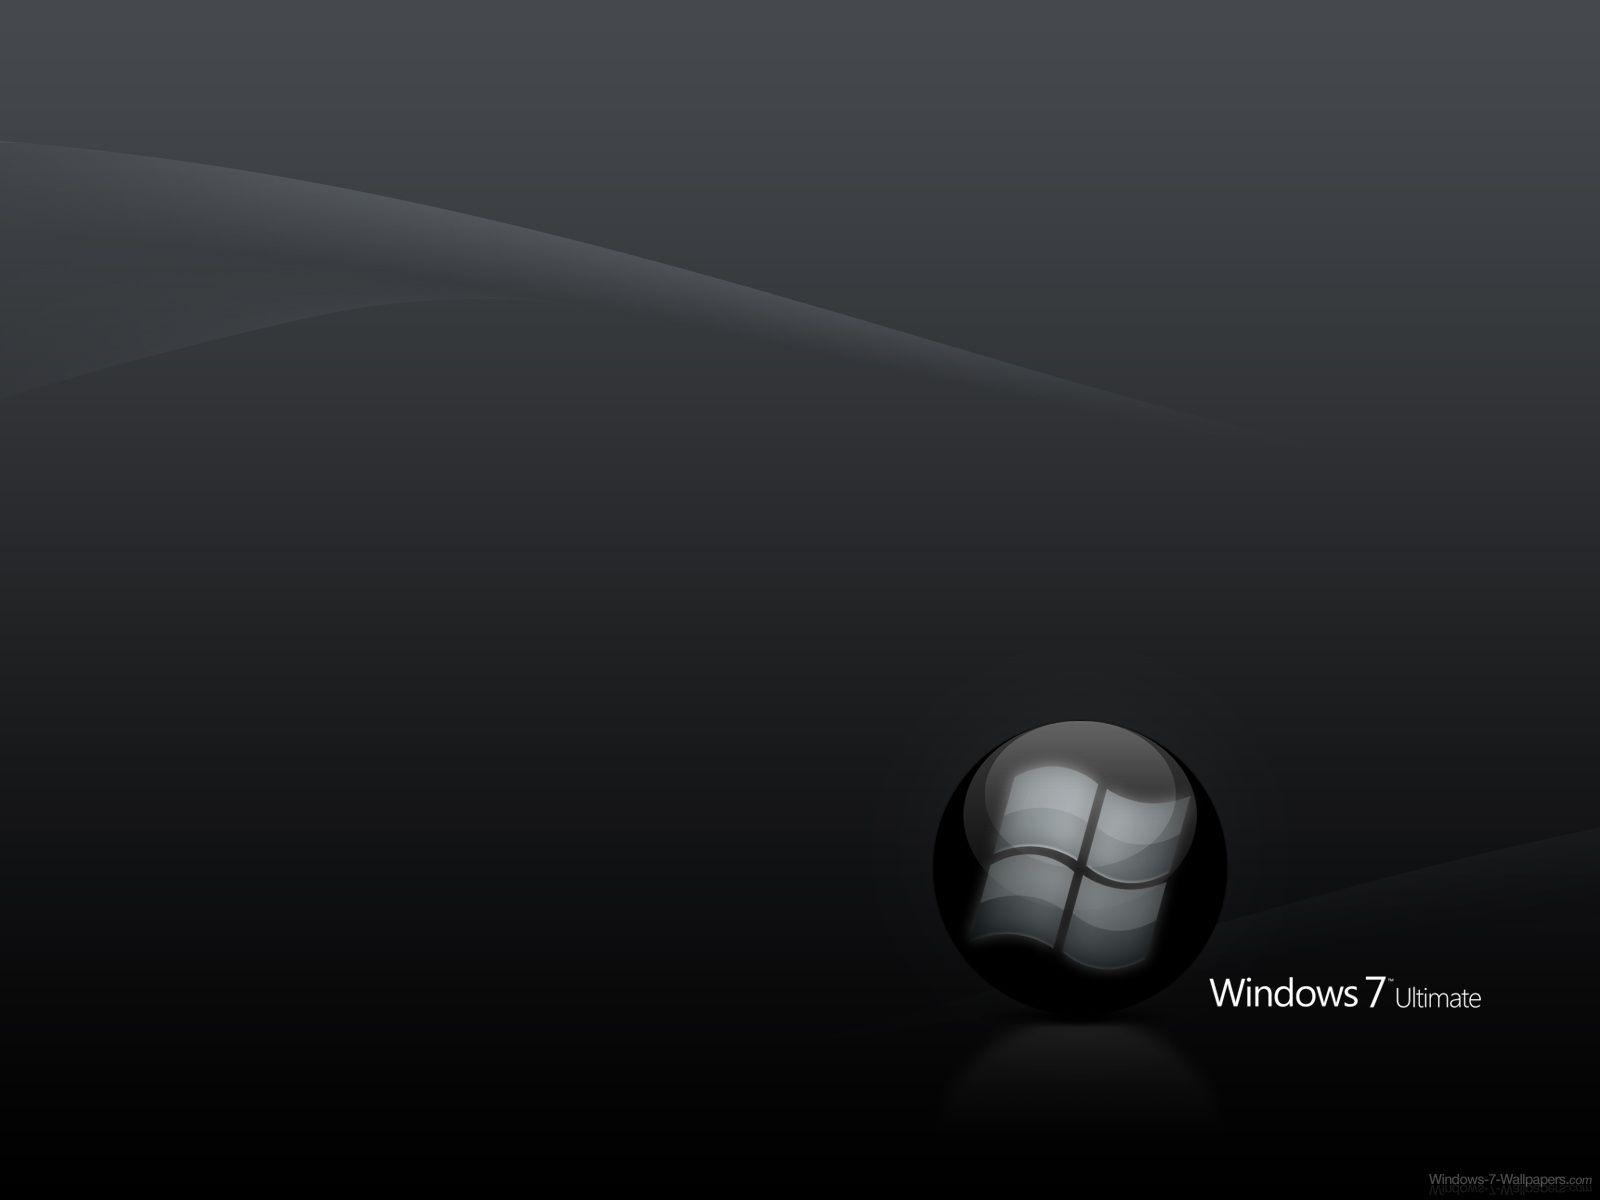 image For > Windows 7 Ultimate Wallpaper HD